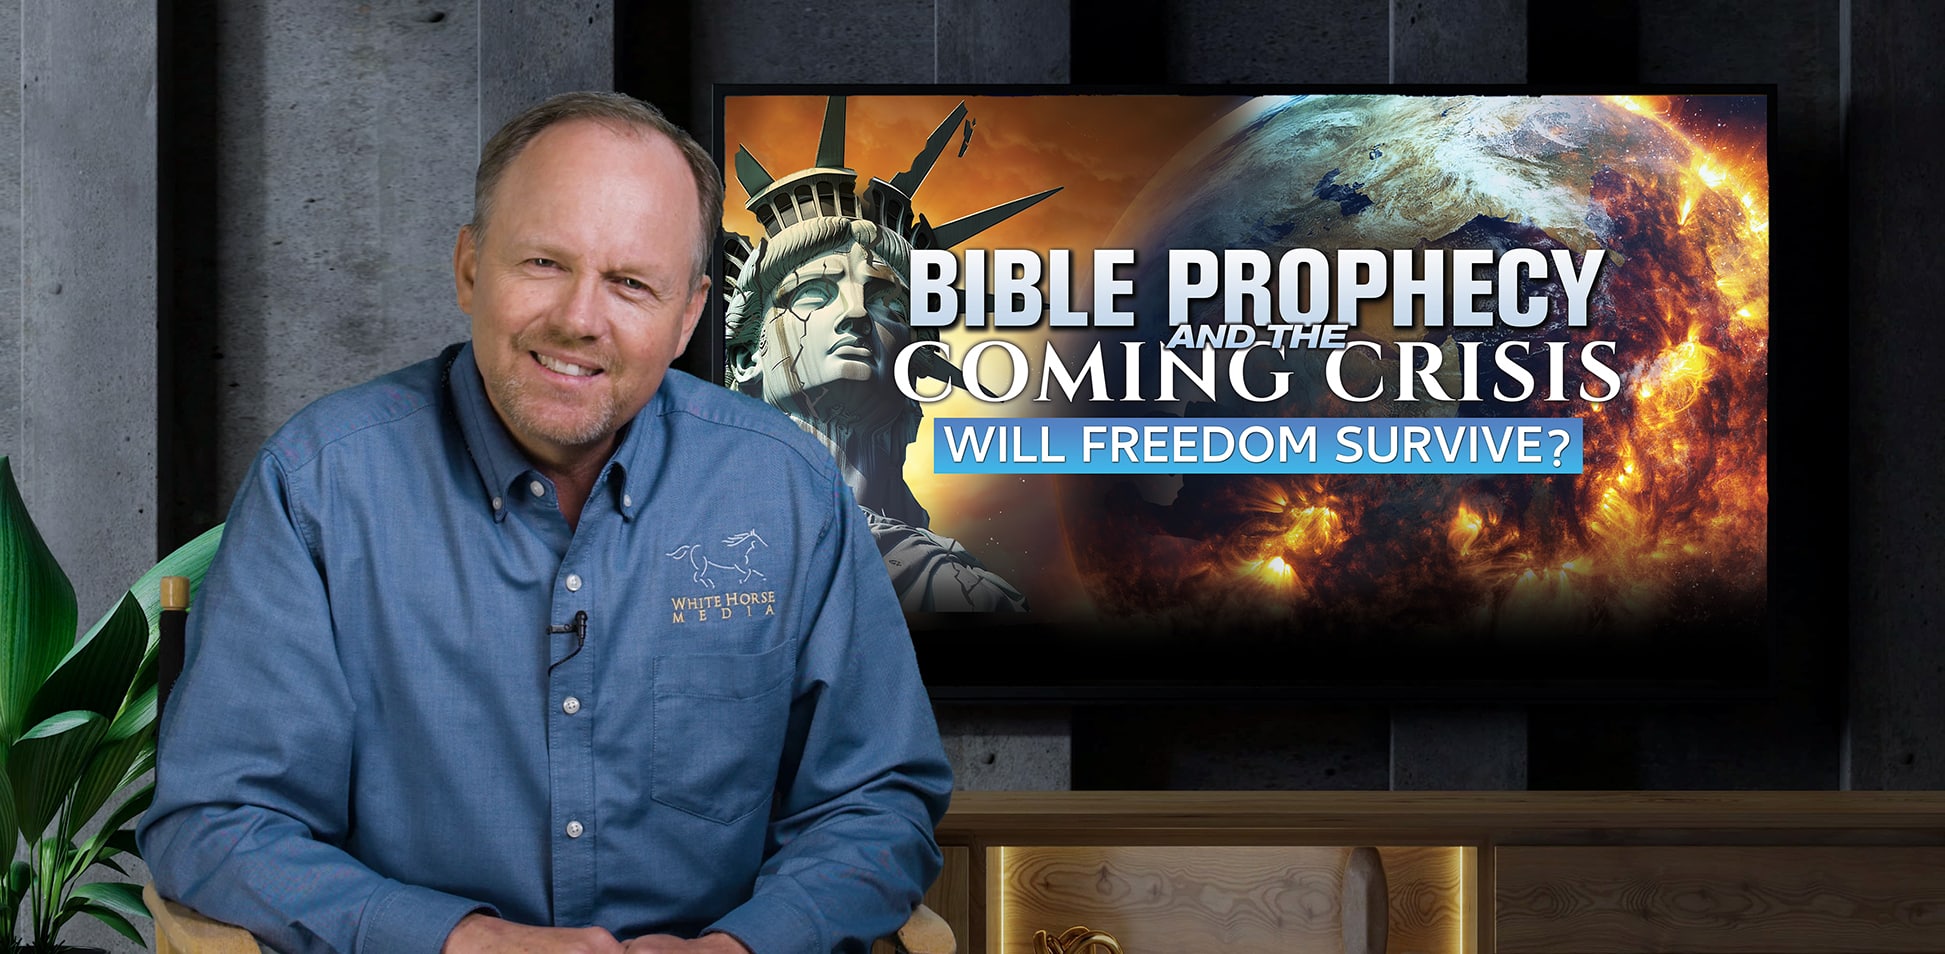 Rob-Knott-Bible-Prophecy-Coming_Crisis